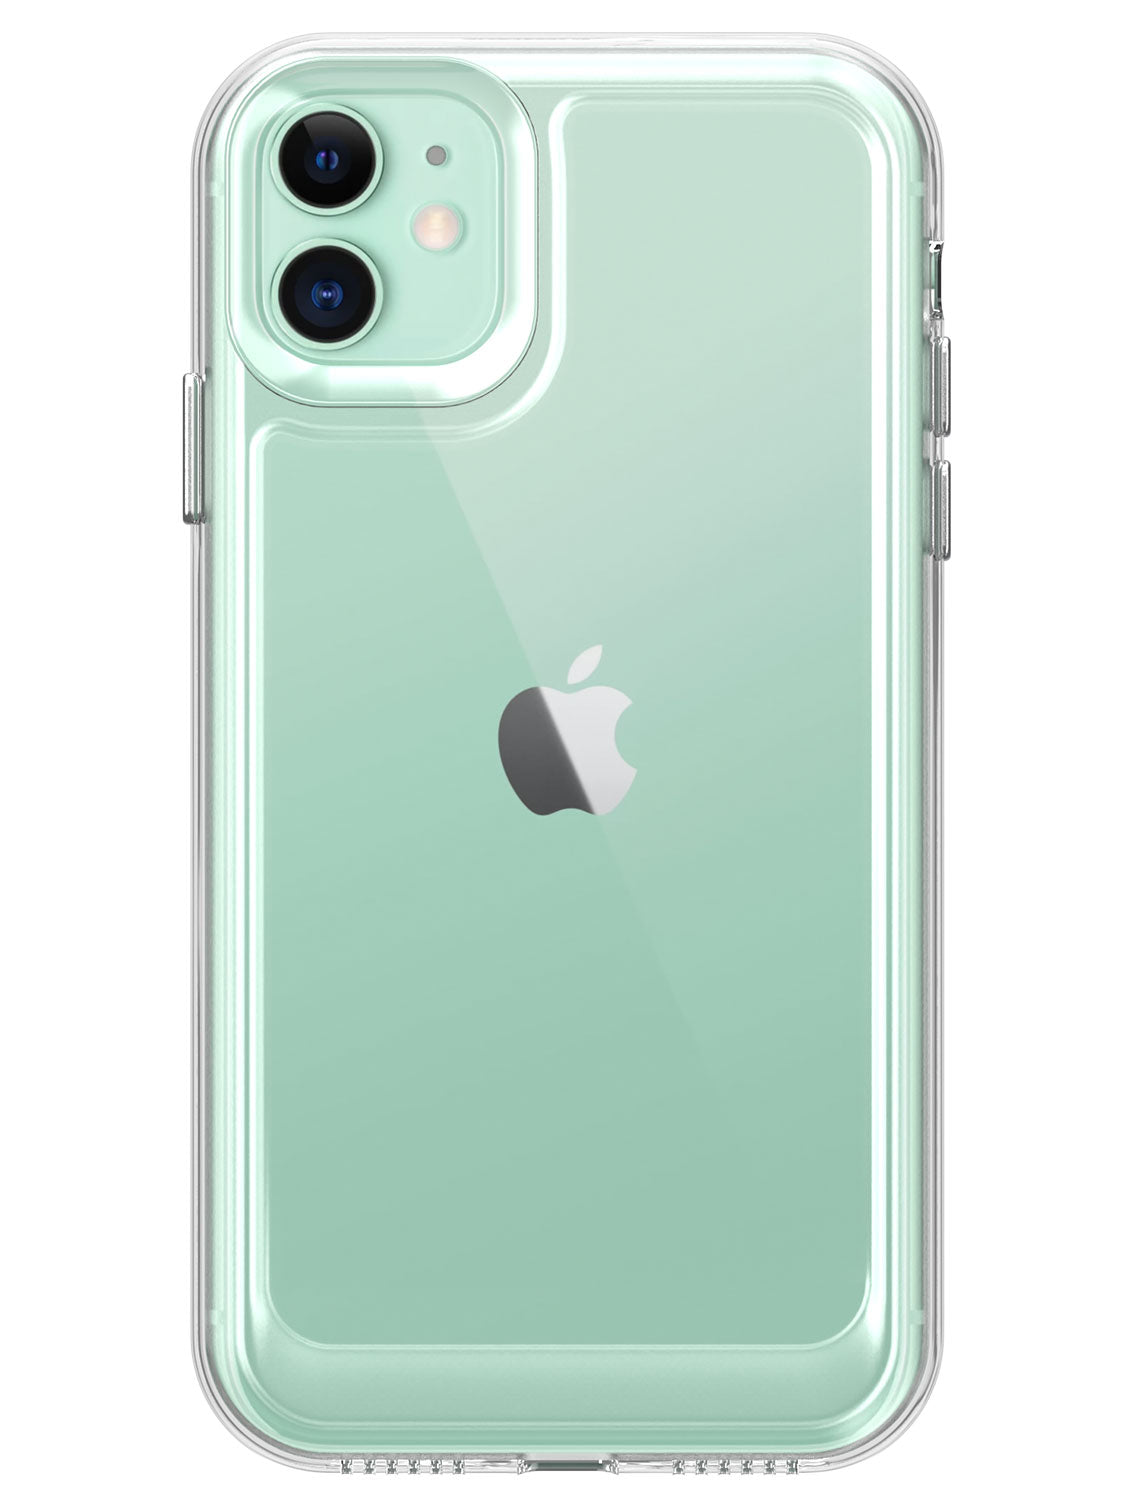 clear case for iPhone 11 , clear cover for iPhone 11 , clear back cover for iPhone 11 , transparent case for iPhone 11